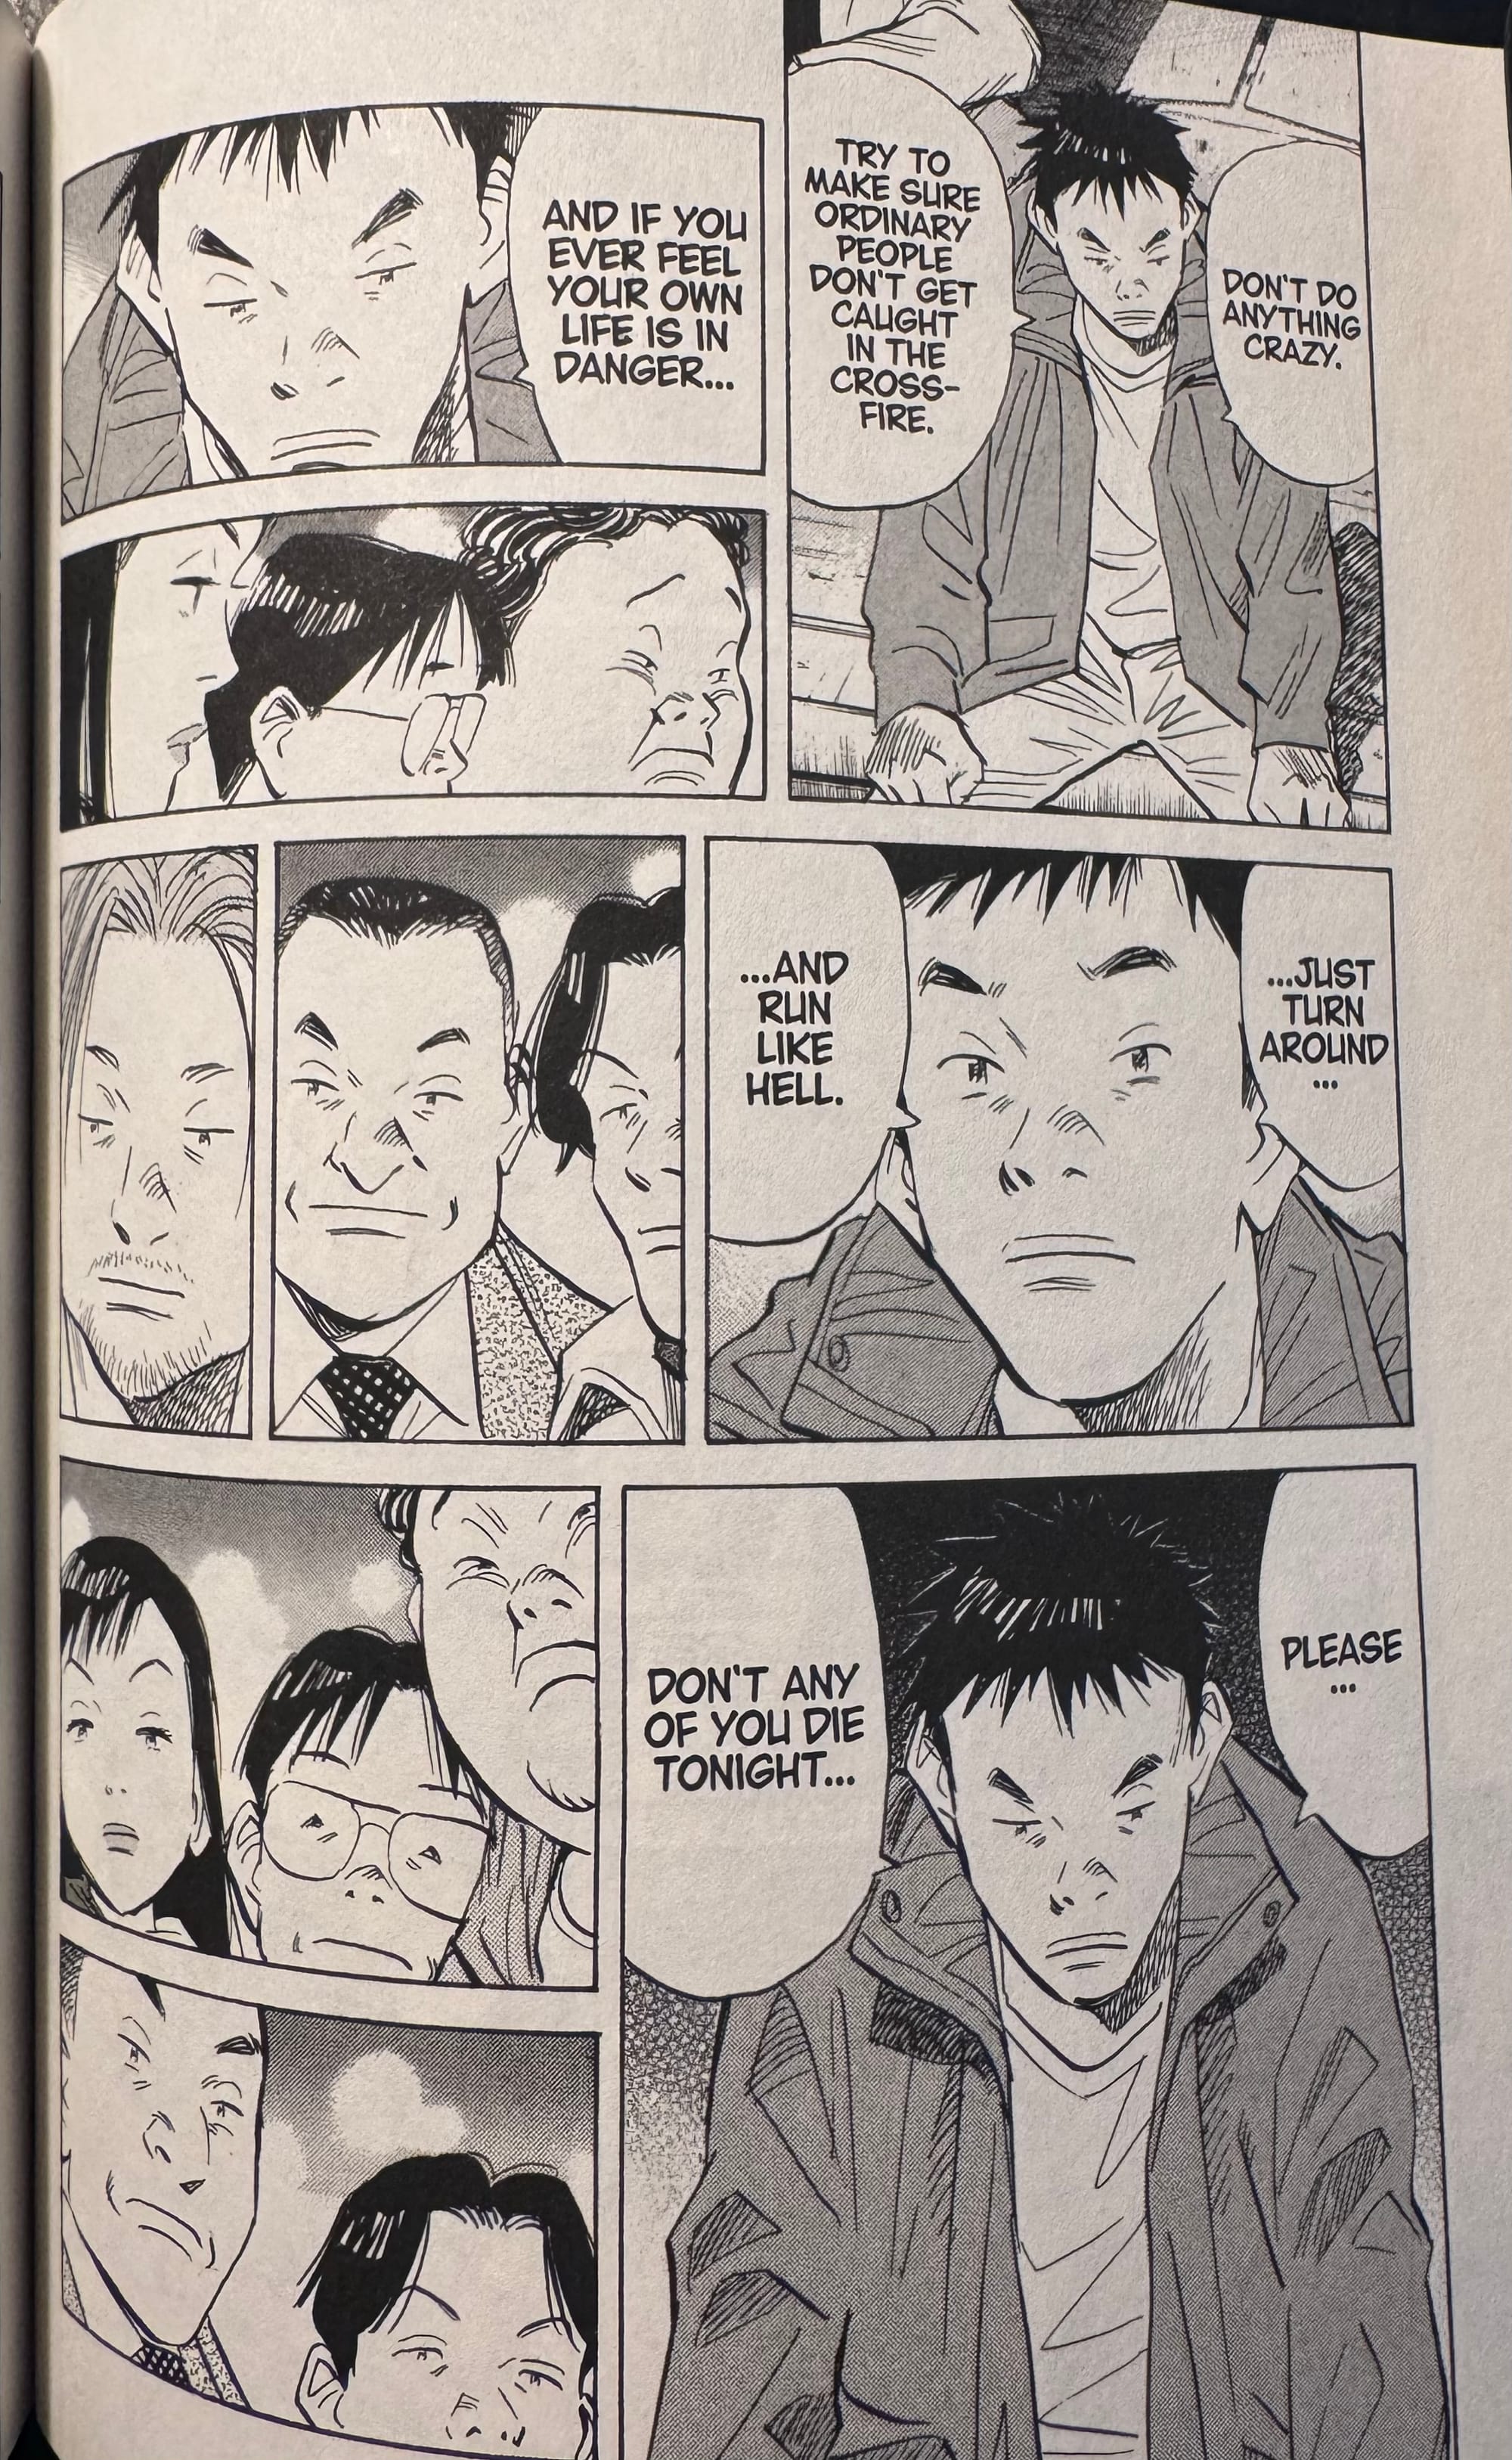 It's the End of the World-- a look at Naoki Urasawa's 20th Century Boys